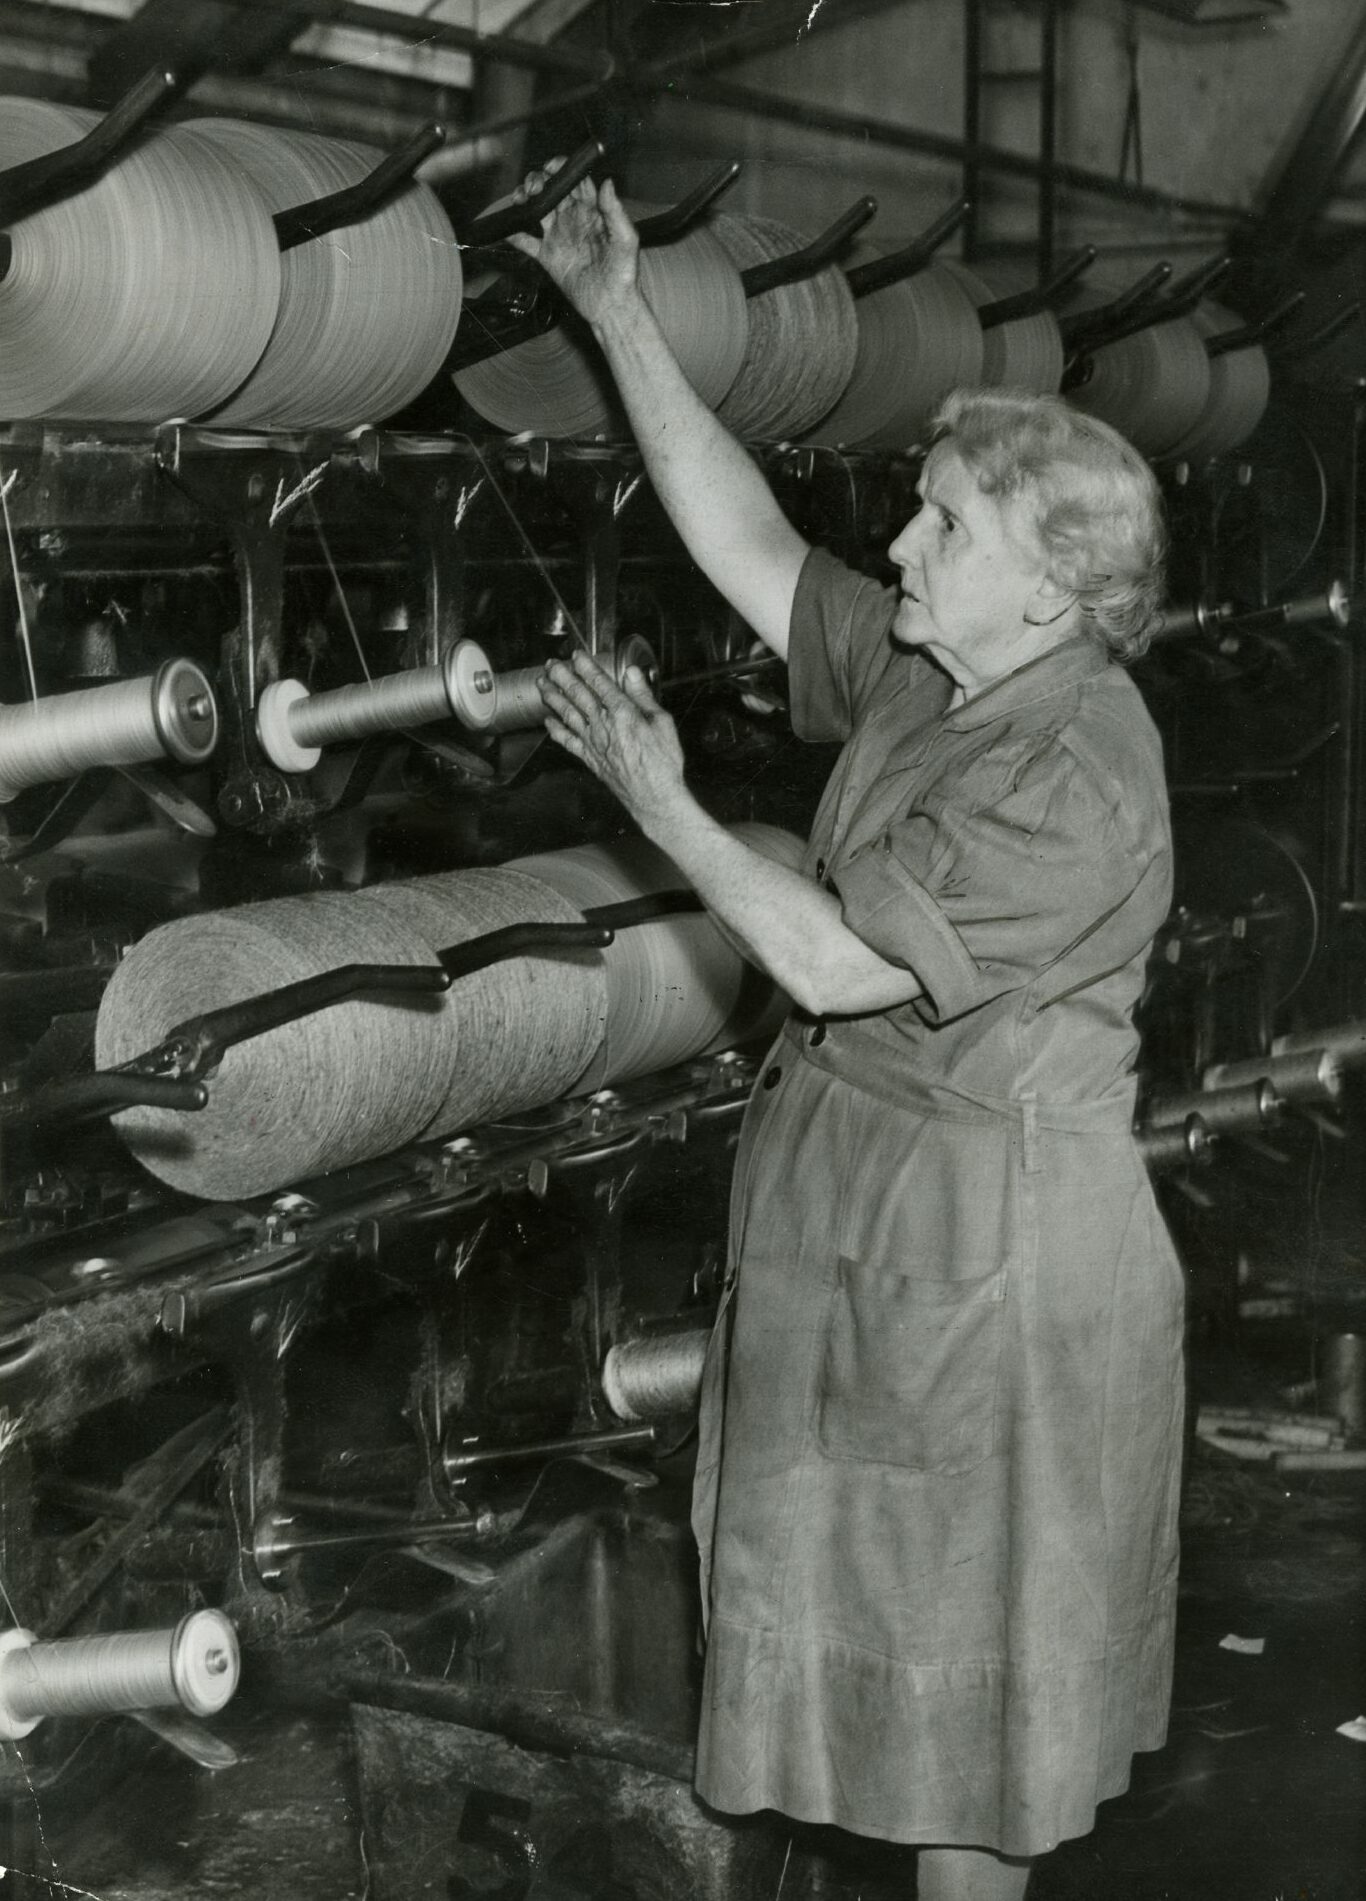 Mary Connelly was 75 when she retired from Halley's Mill in 1950, after 61 years. Image: DC Thomson.